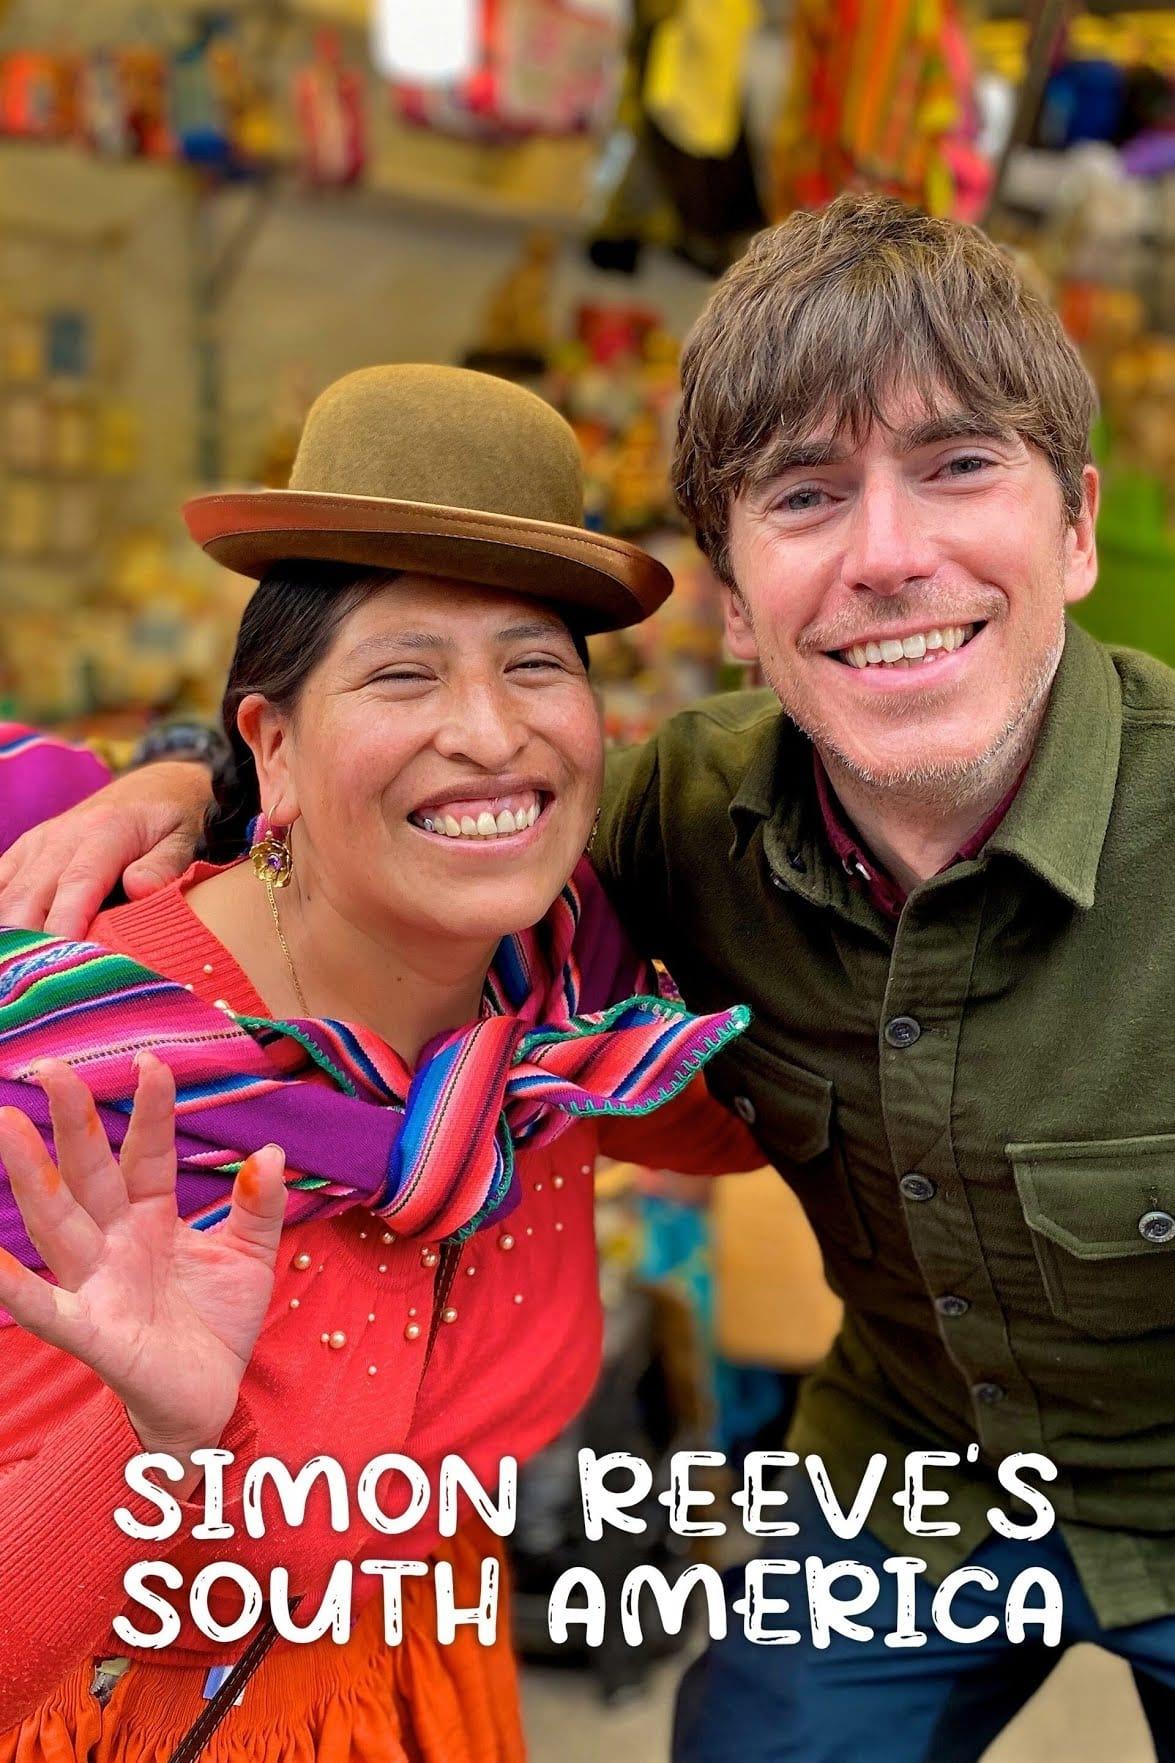 Simon Reeve's South America poster